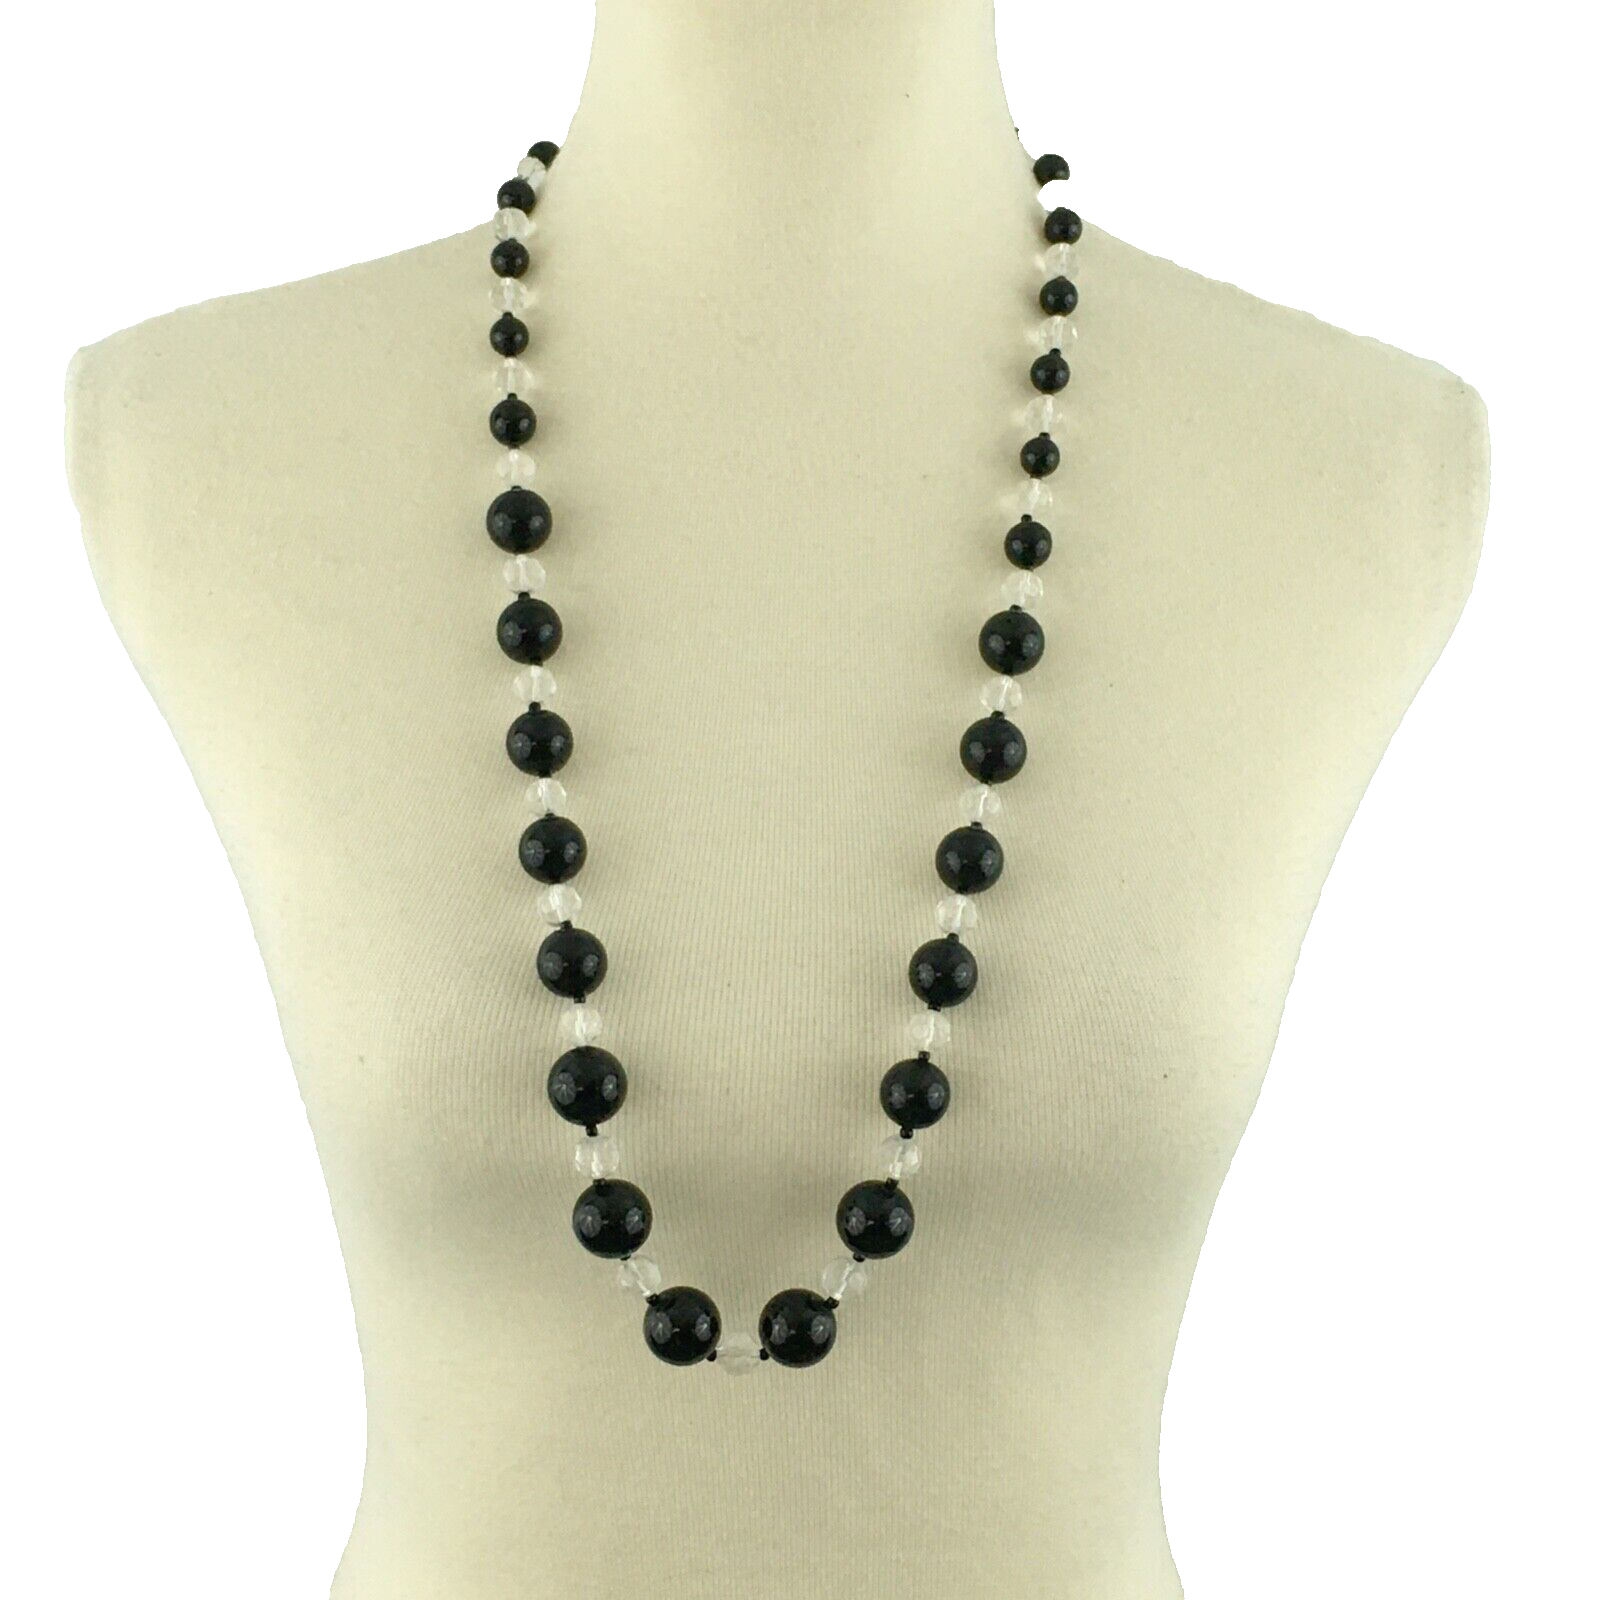 JOAN RIVERS graduated bead necklace - black & clear acrylic gold-tone 34" - $30.00